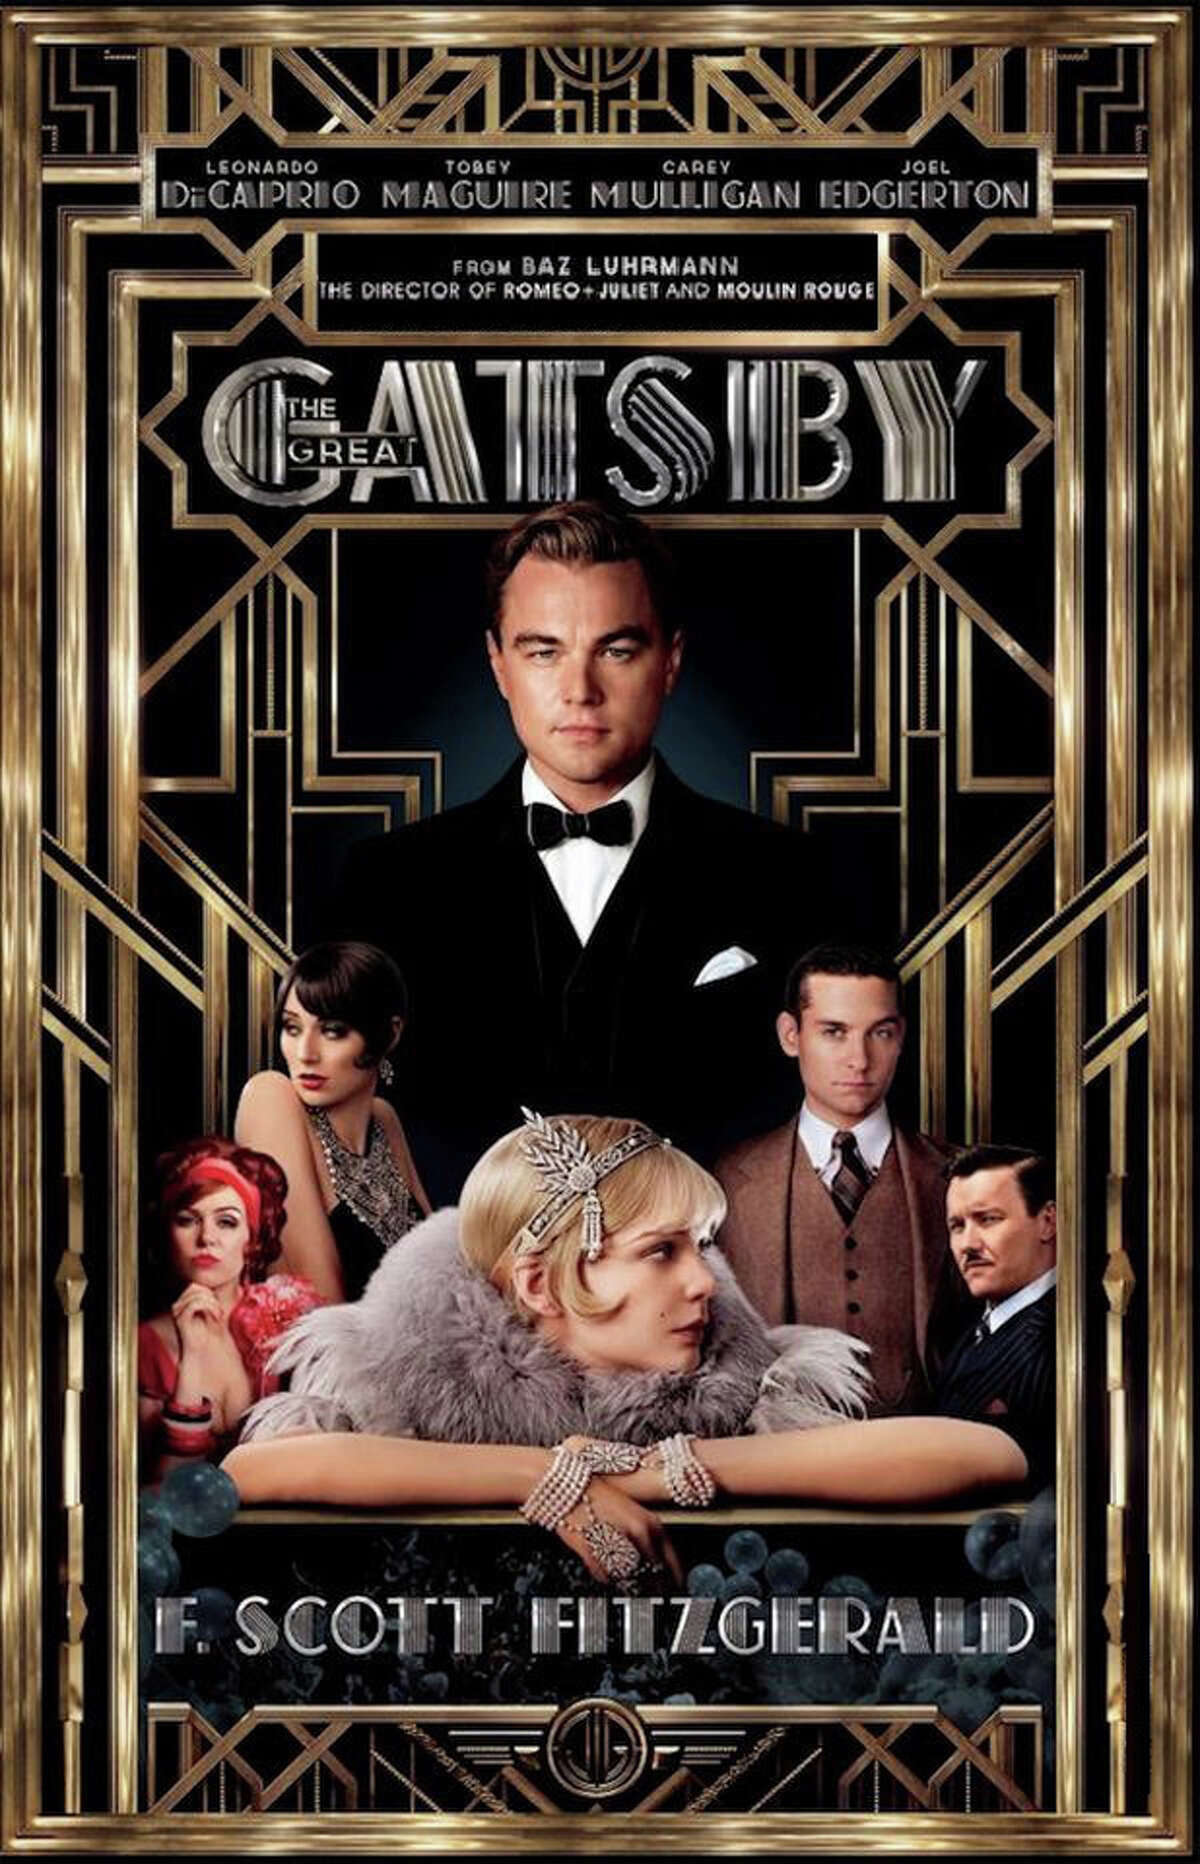 The Great Gatsby 2013 book cover and movie poster.